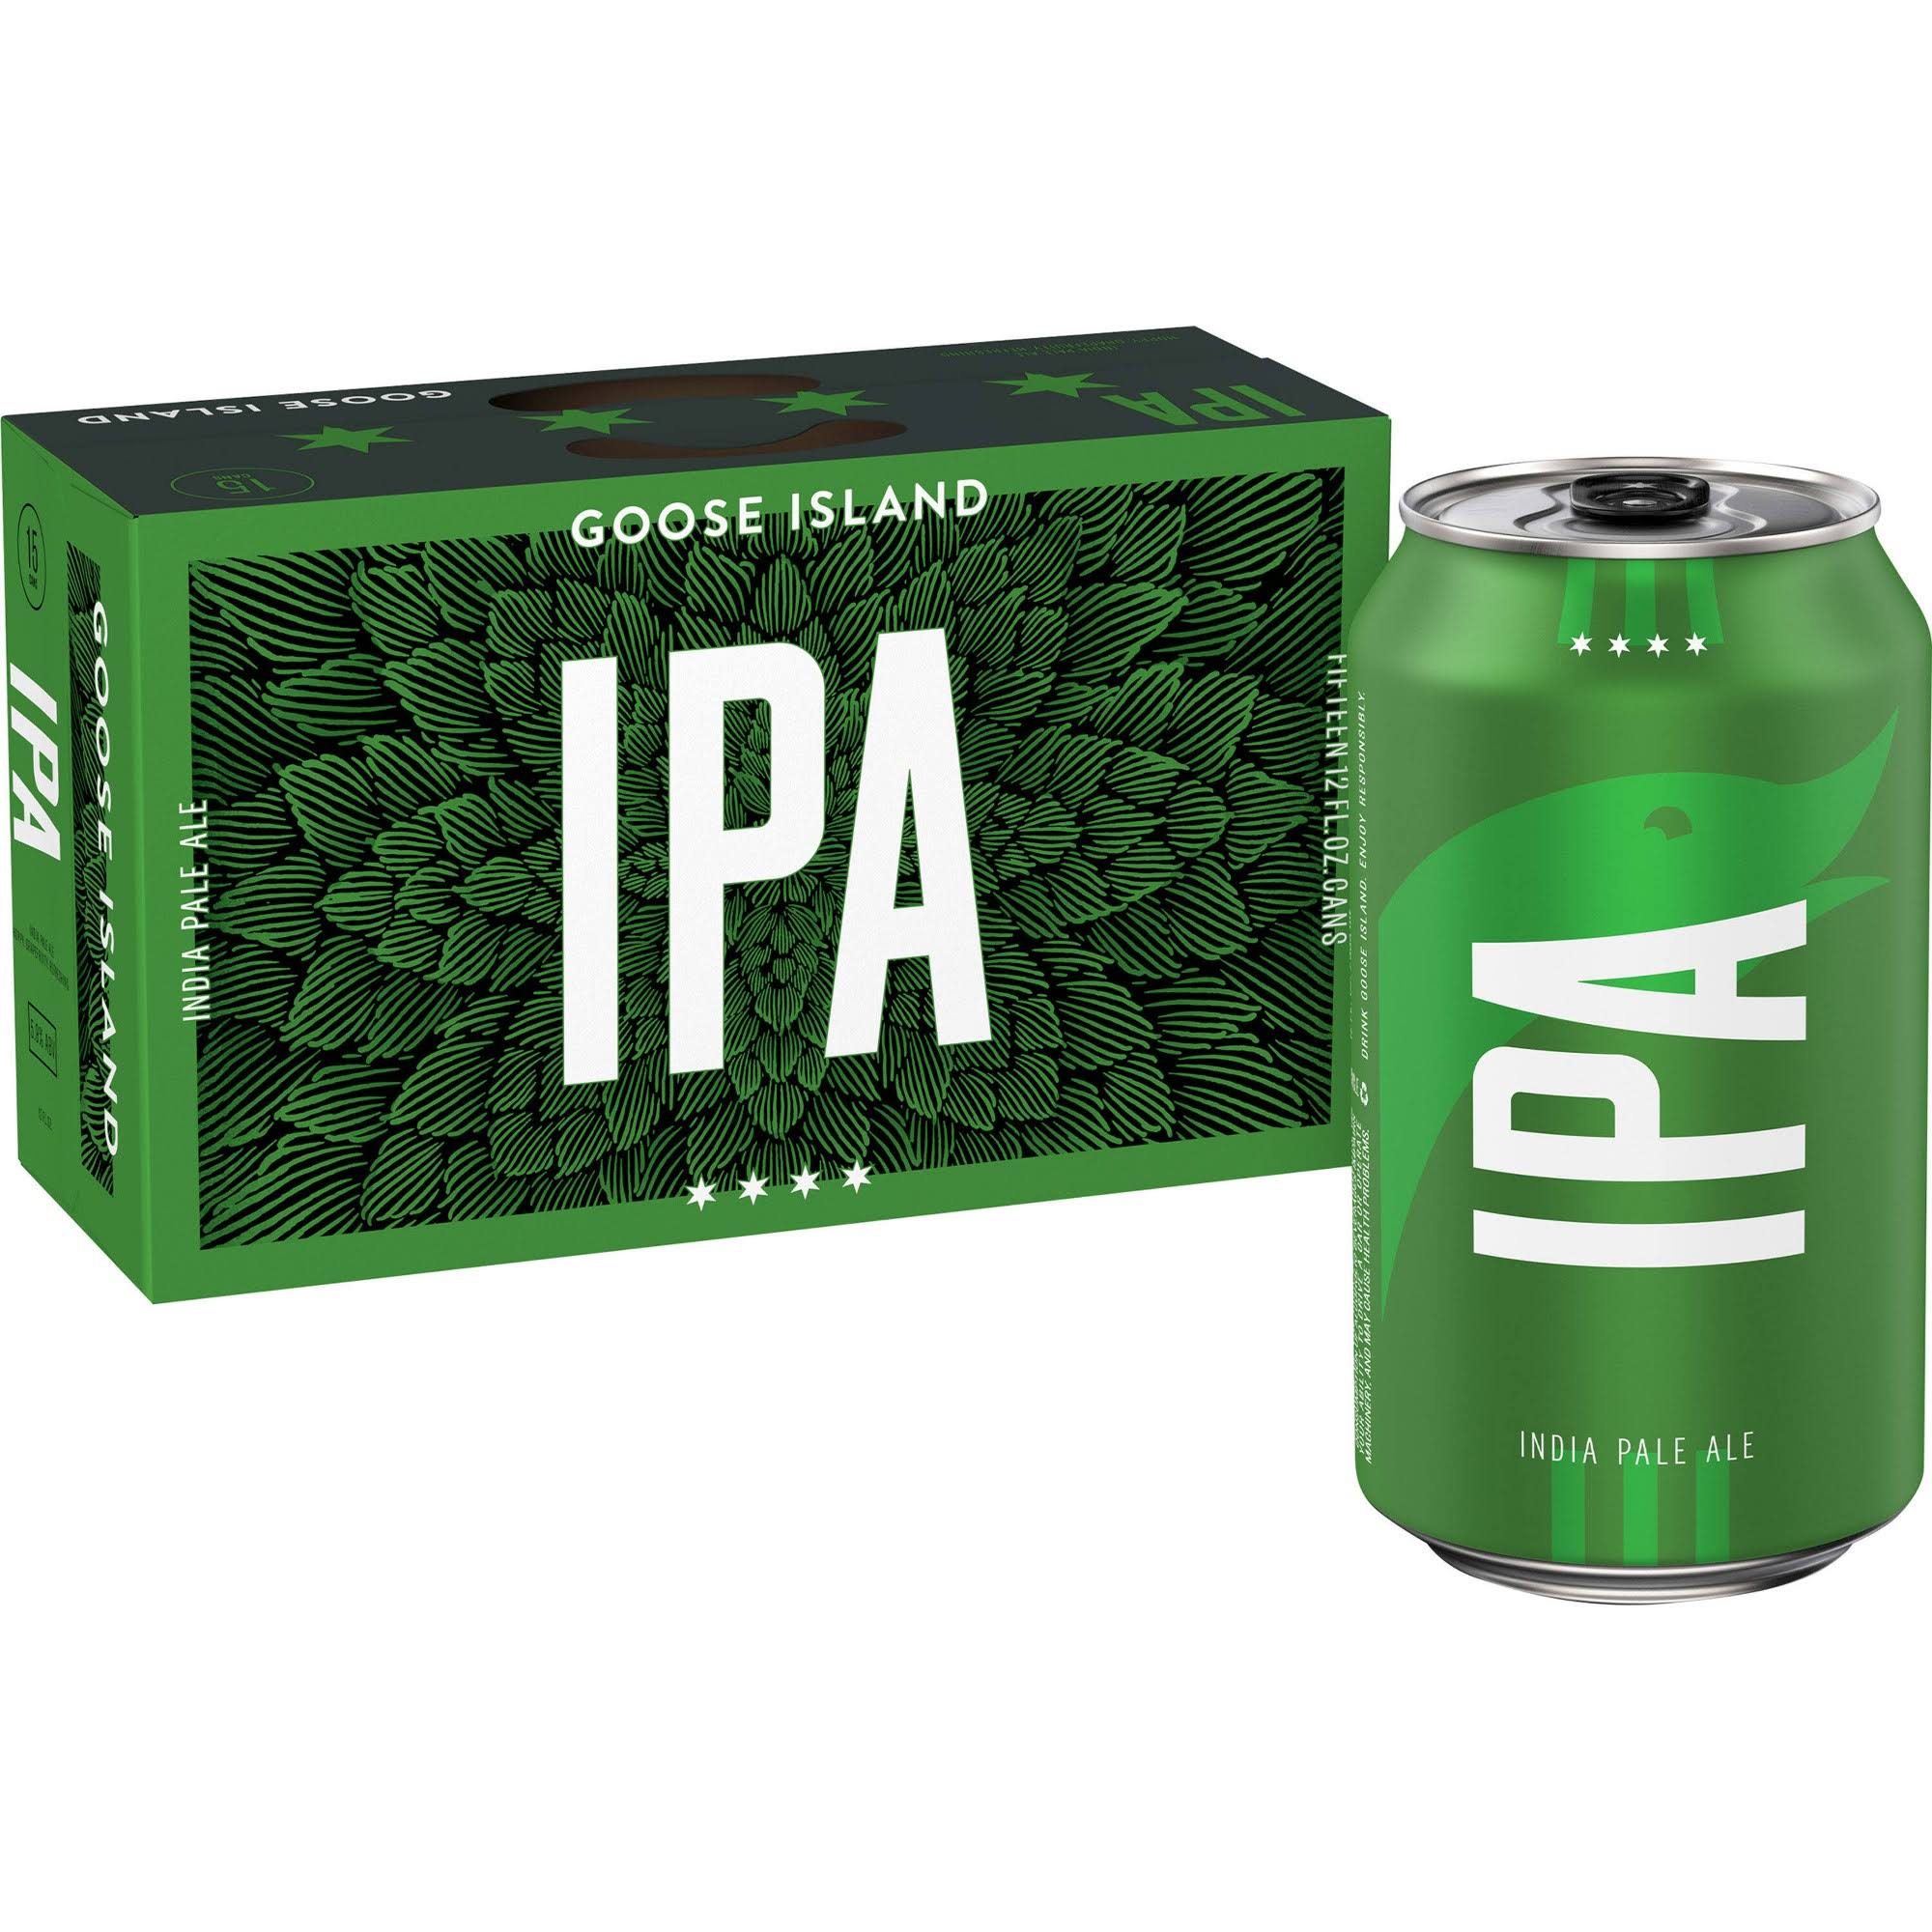 Goose Island Beer, IPA - 15 pack, 12 fl oz cans